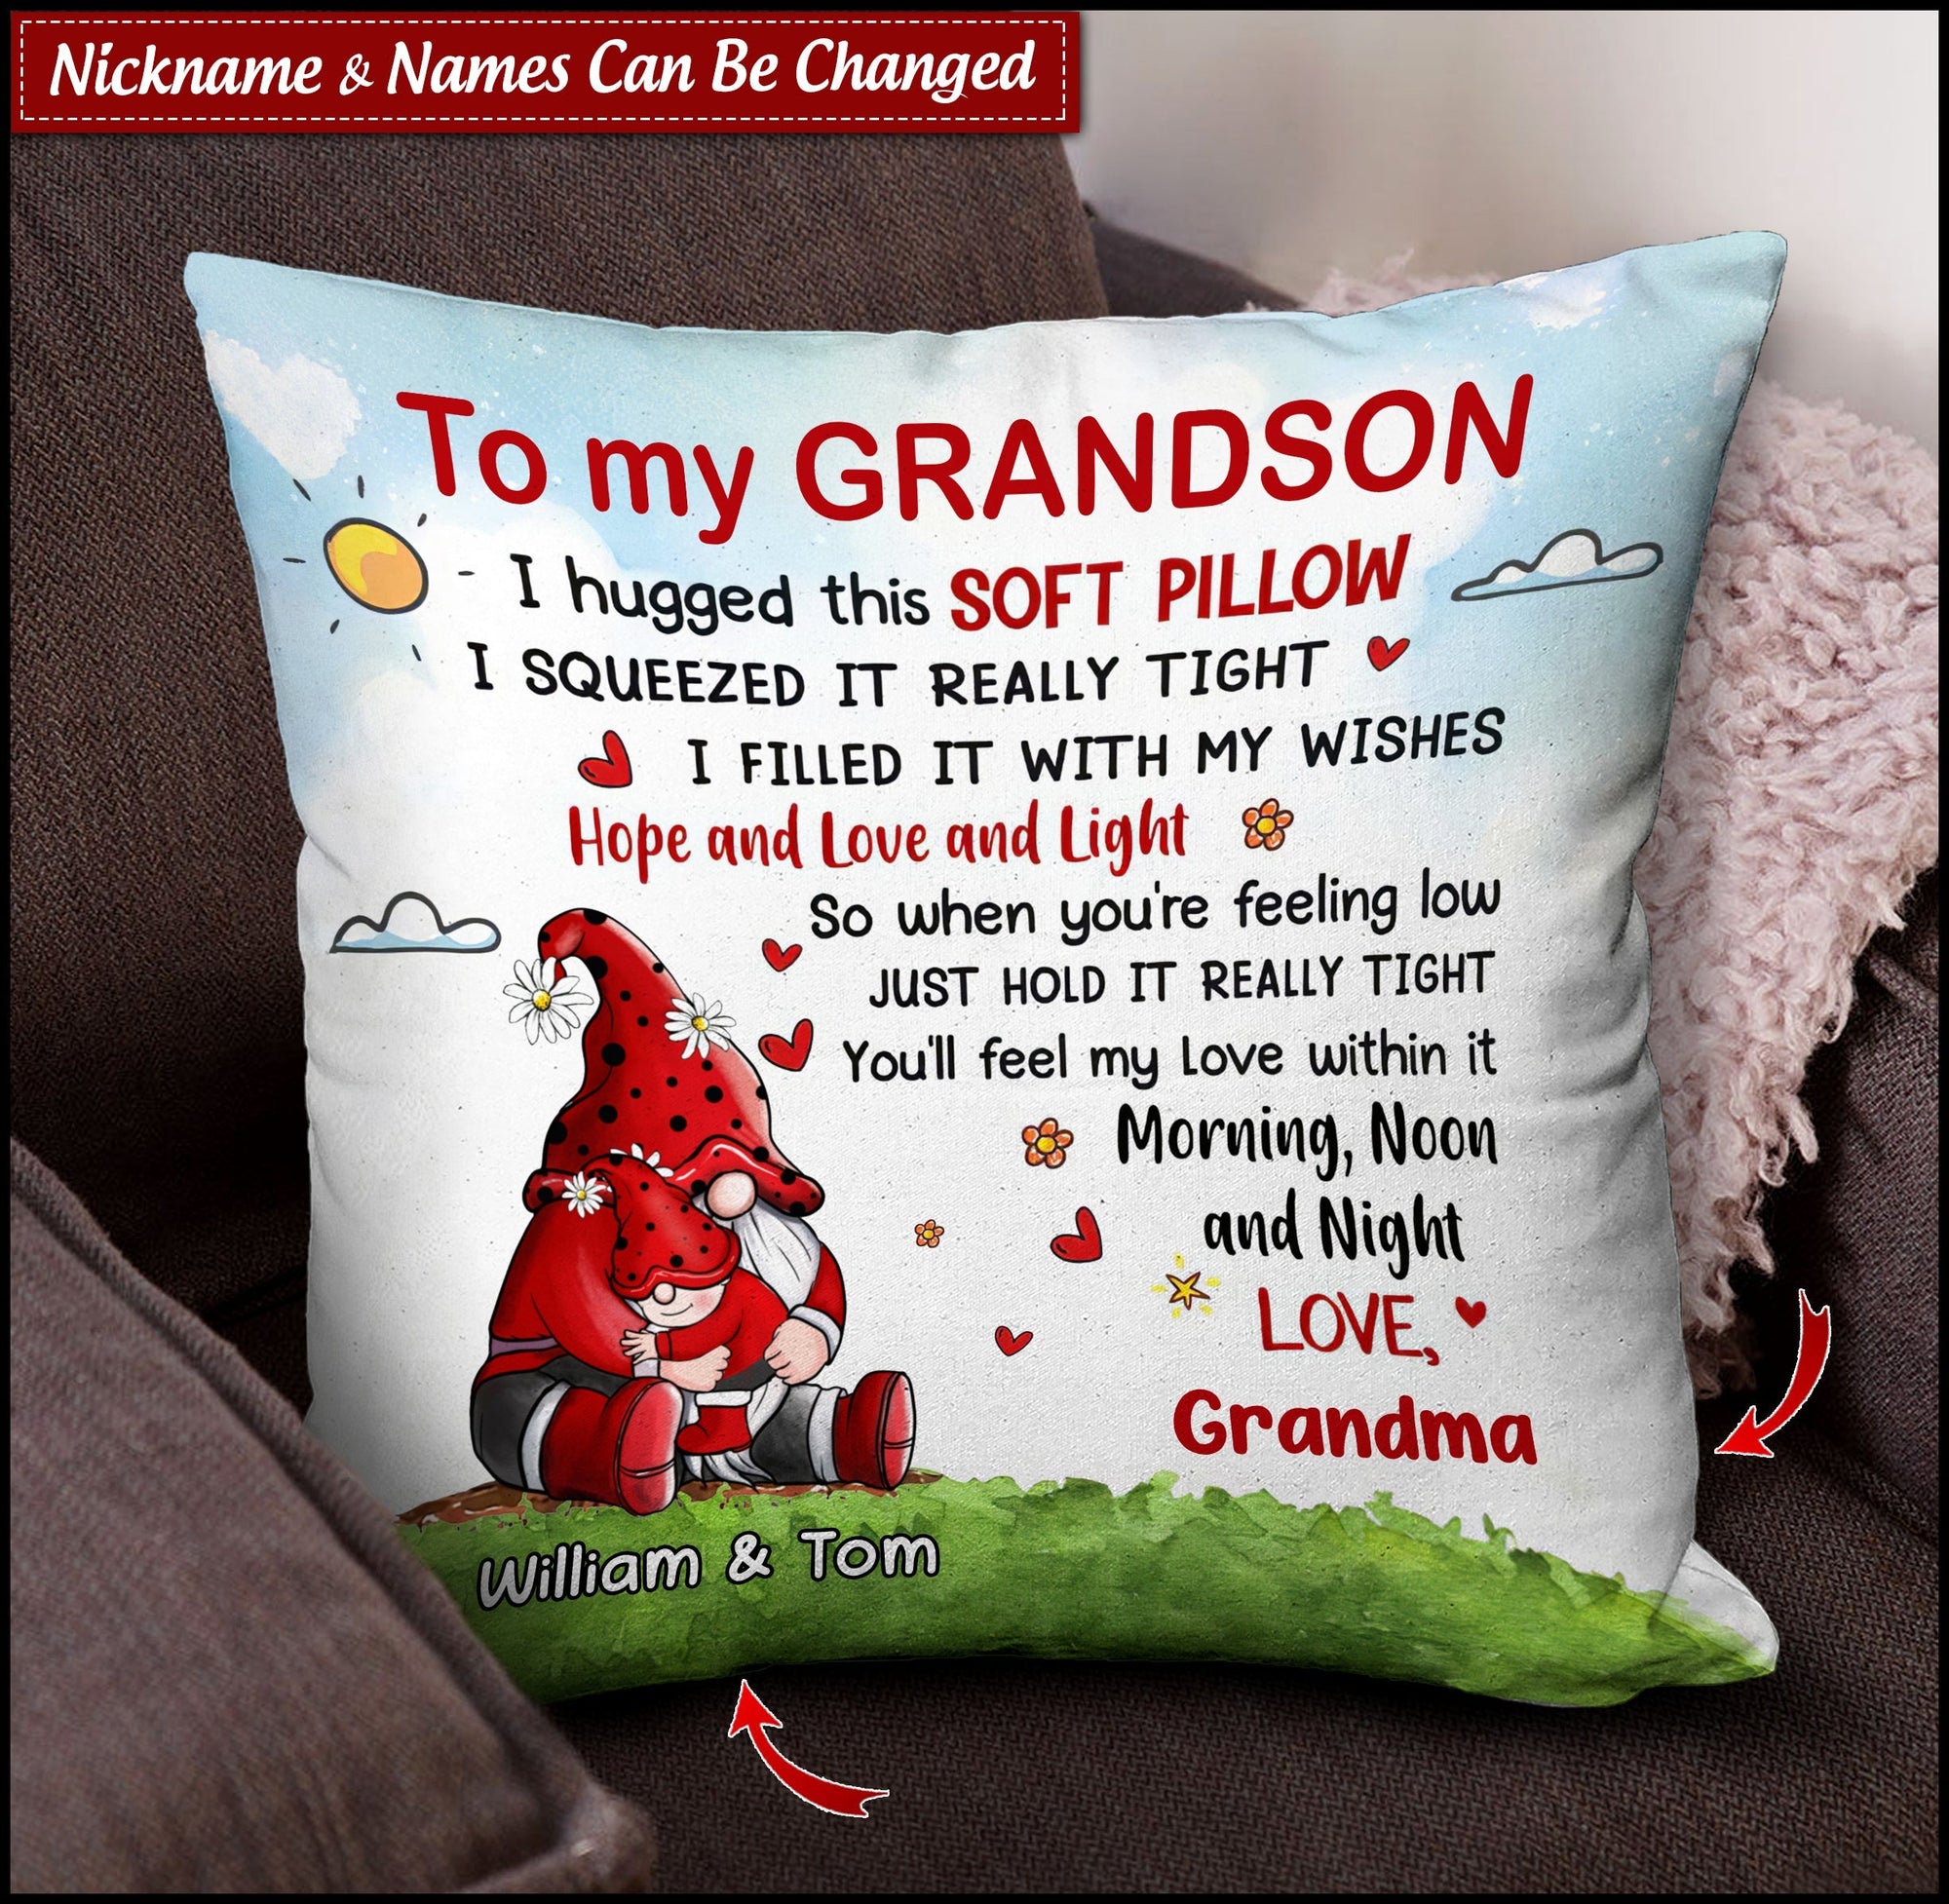 Grandma- Mom doll with Granddaughter Grandson Personalized Pillowcase